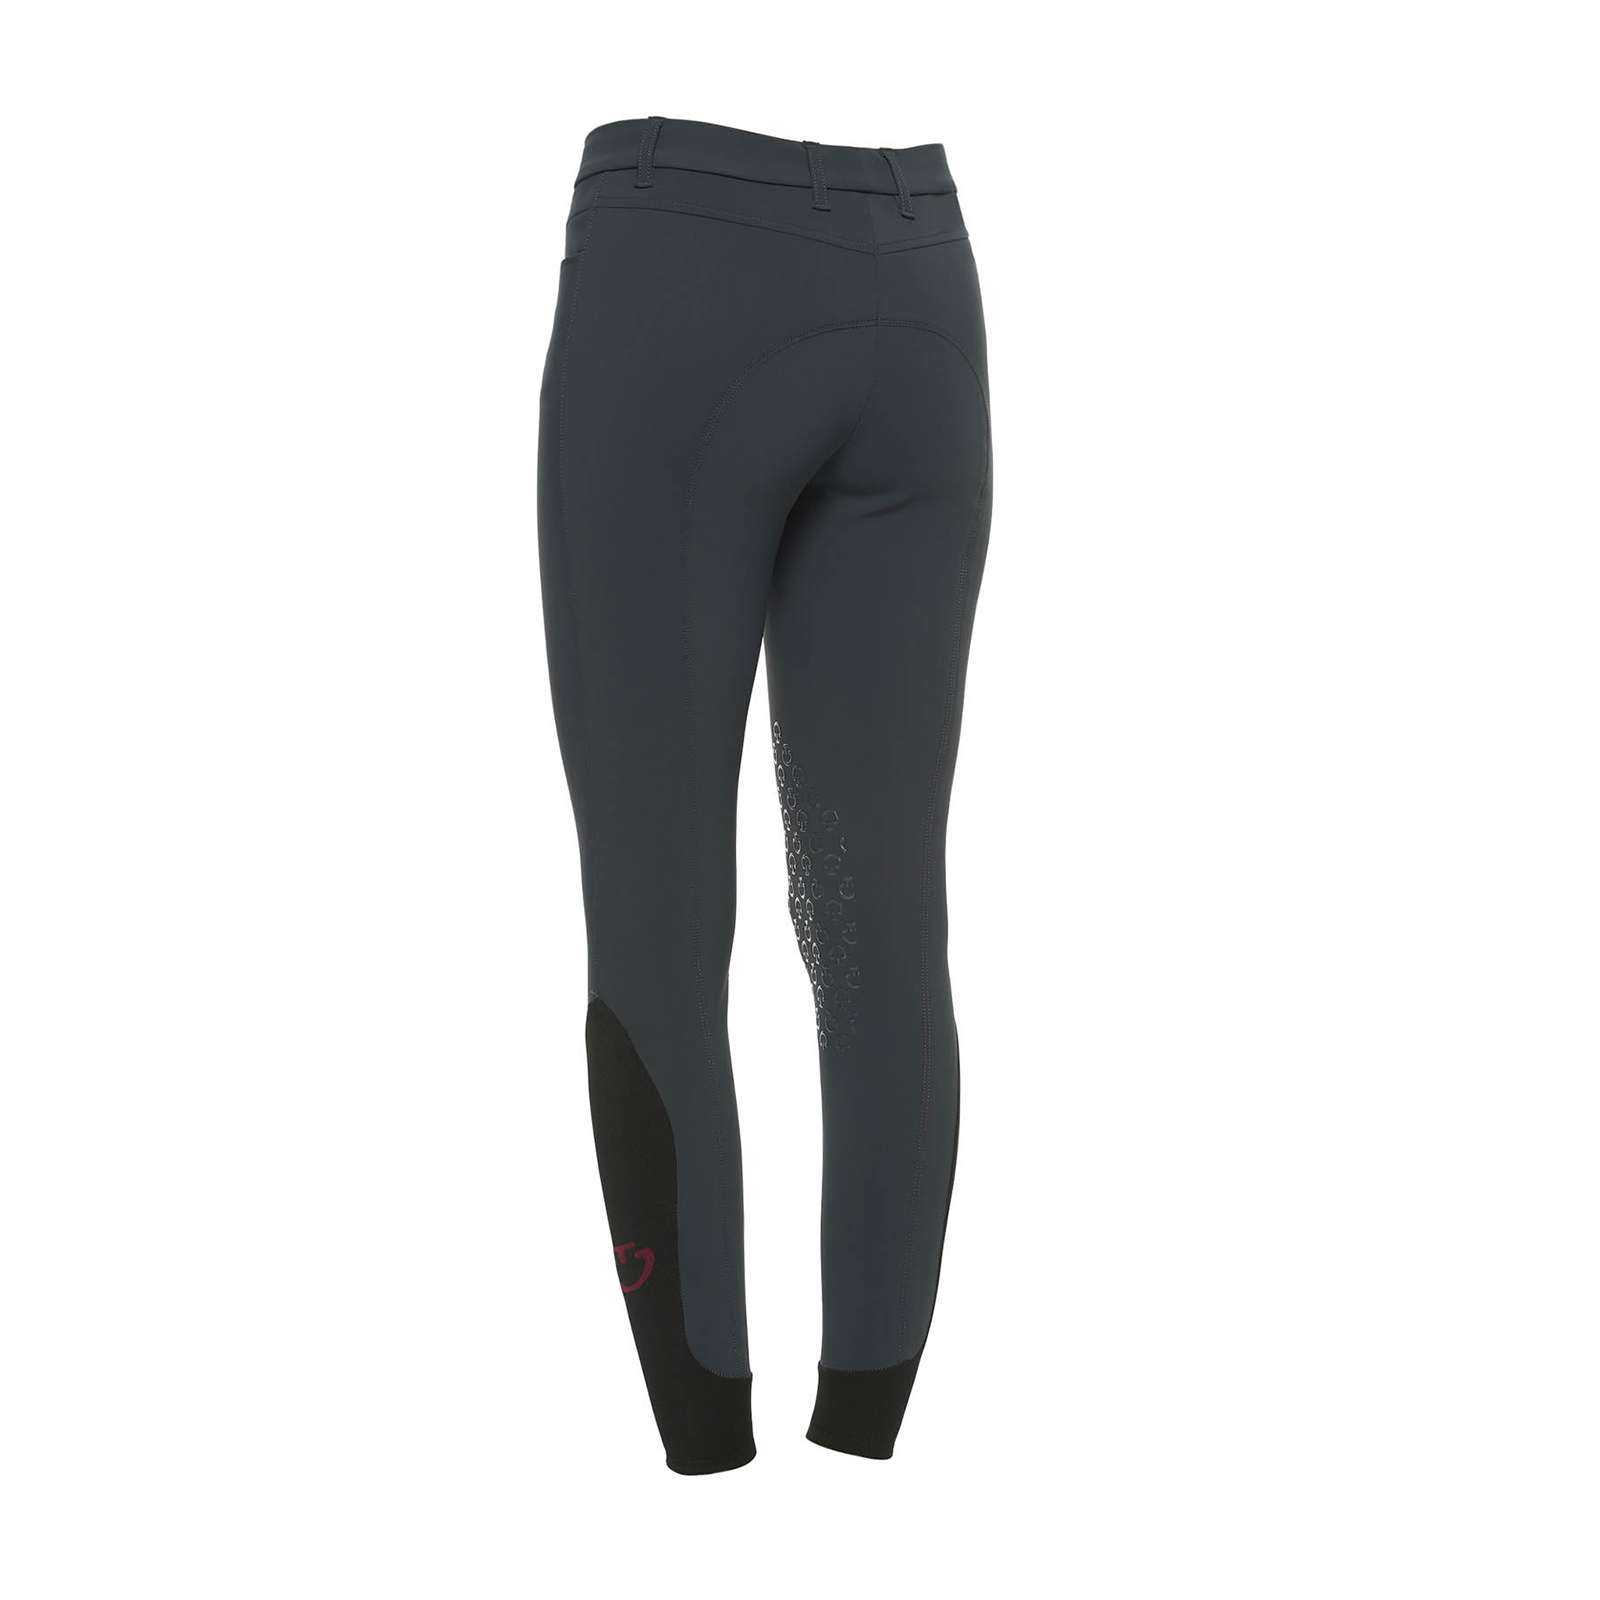 Buy Cavalleria Toscana New Grip System Knee Patch Breeches for Women